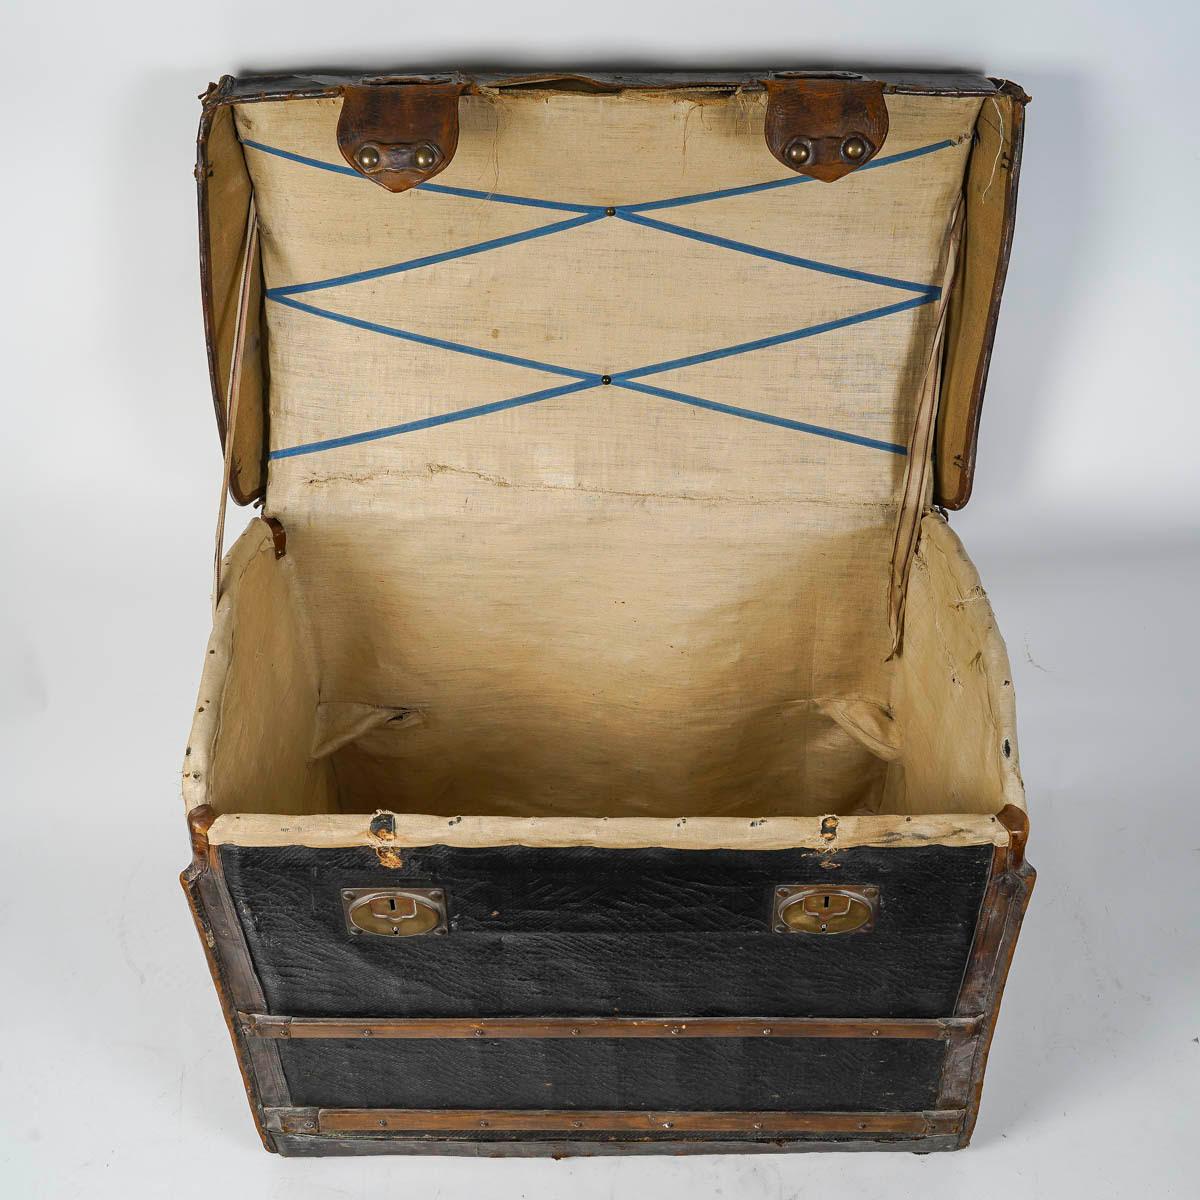 Large travel trunk, antique travel trunk in leather, wood and fabric, 19th century.

Large travel trunk, leather, wood and fabric travel trunk, minor restoration required, 19th century.
H: 68cm, W: 82cm, D: 51.5cm